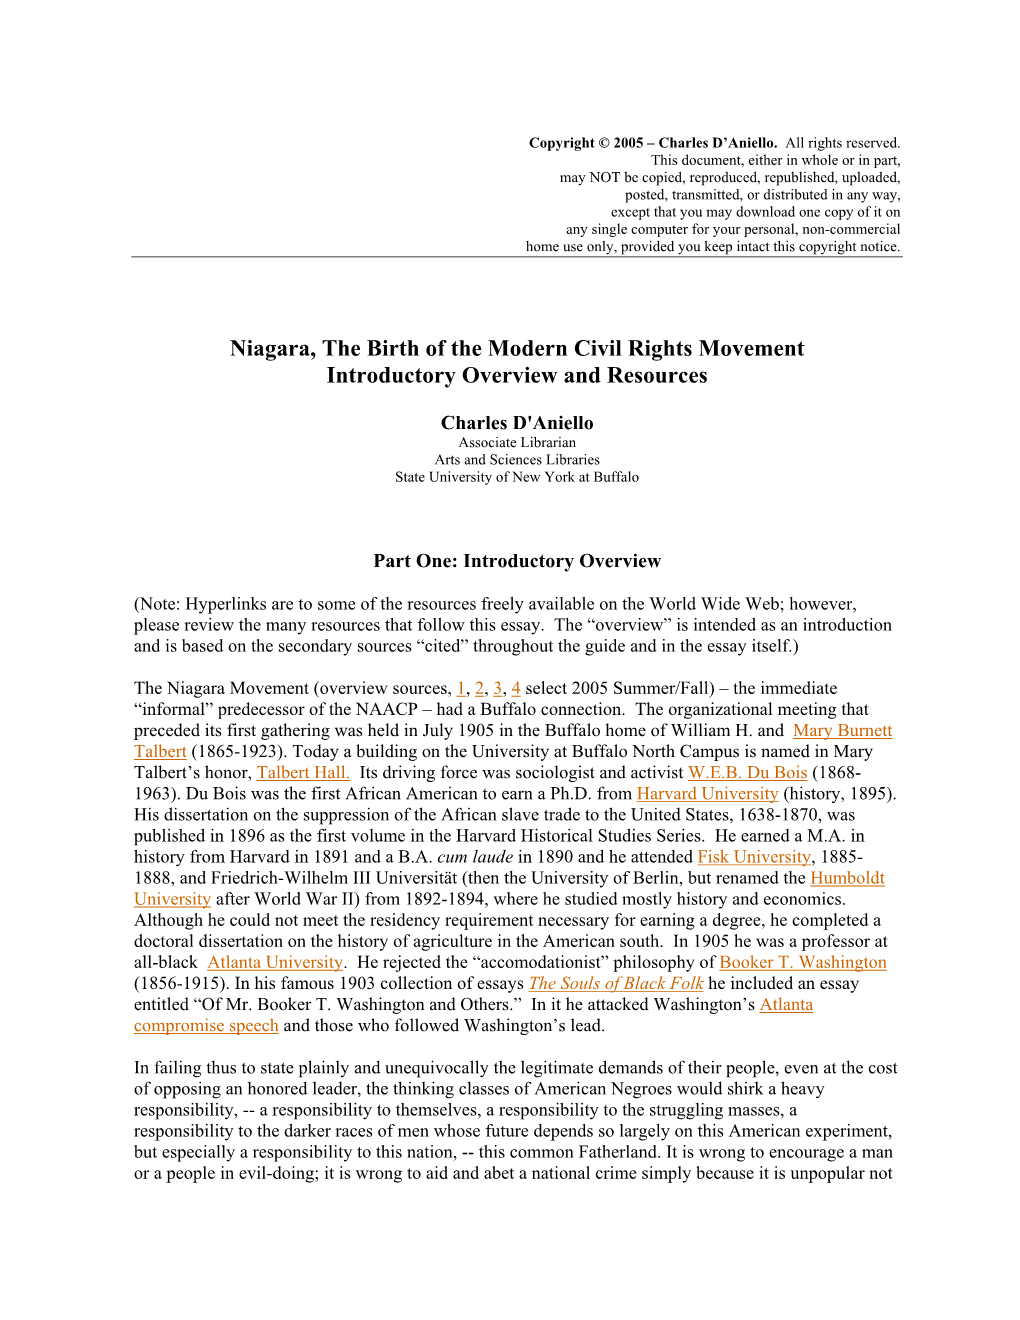 Niagara, the Birth of the Modern Civil Rights Movement Introductory Overview and Resources